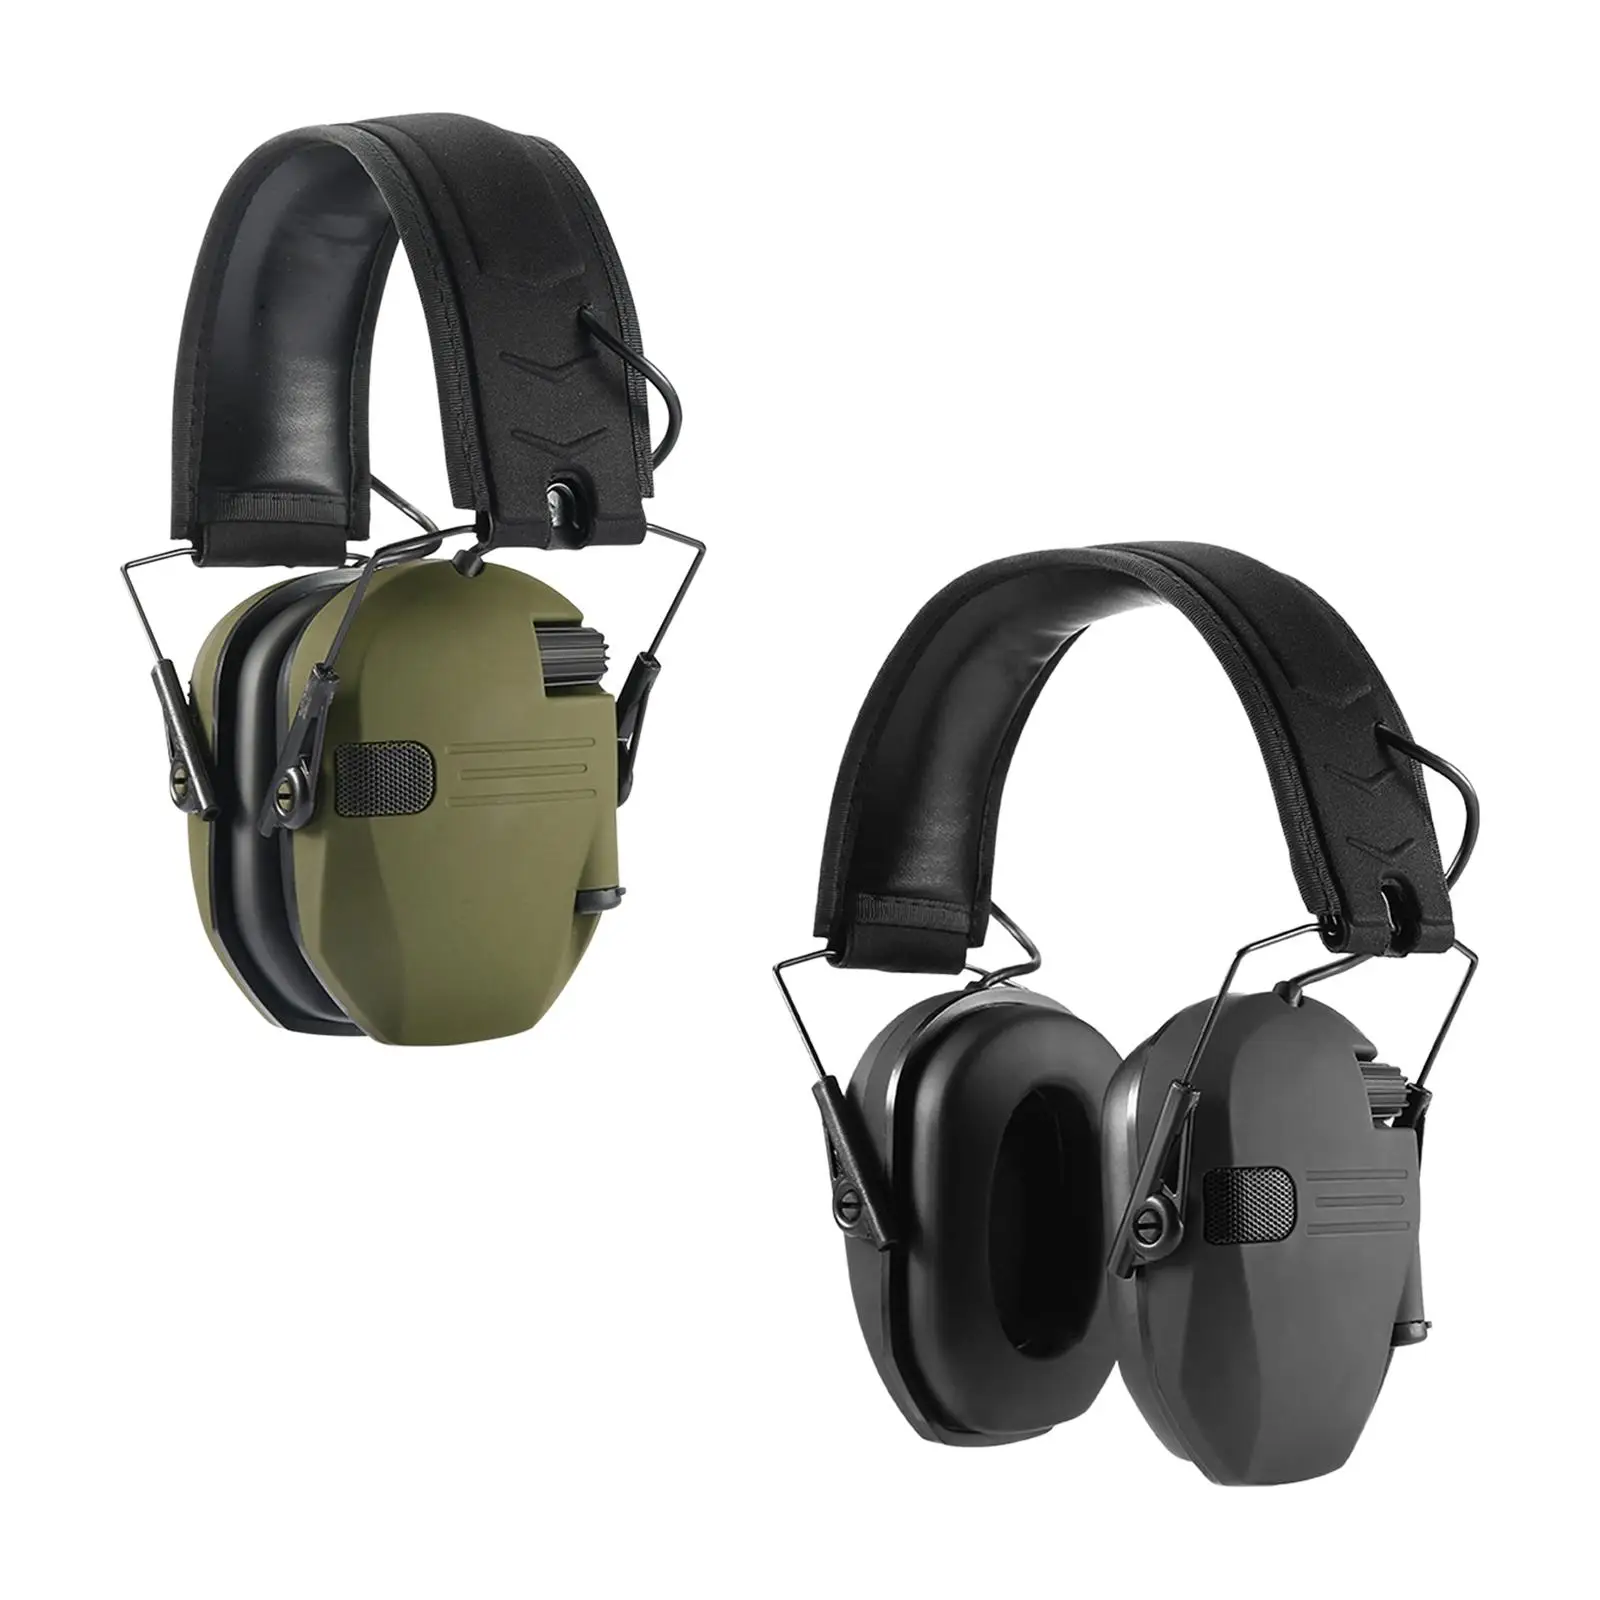 Electronic Earmuffs Safety Nrr 22dB Hearing Protection Foldable for Mowing Hunting Study Work Team Activities